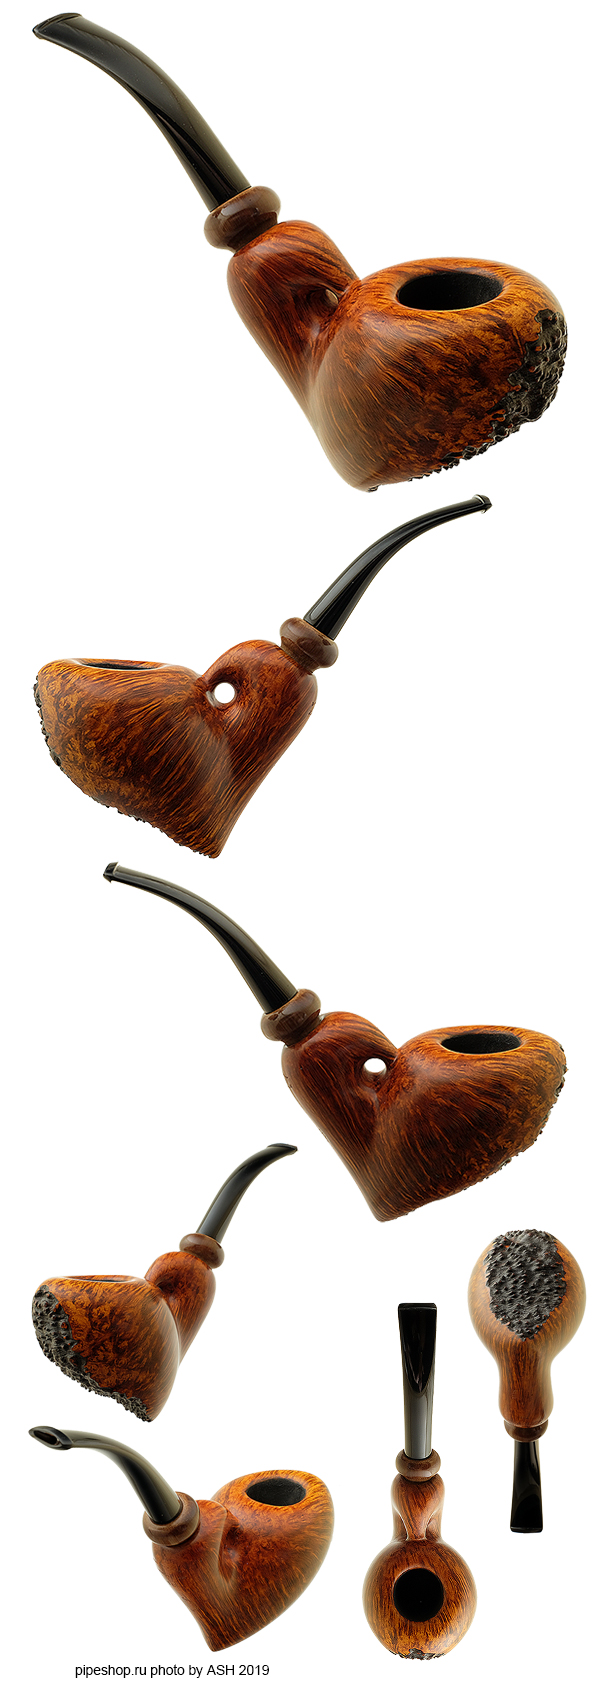   TONNI NIELSEN SMOOTH PLATEAUX NAUTILUS HEART WITH HORN Gr. VIKING (2016)